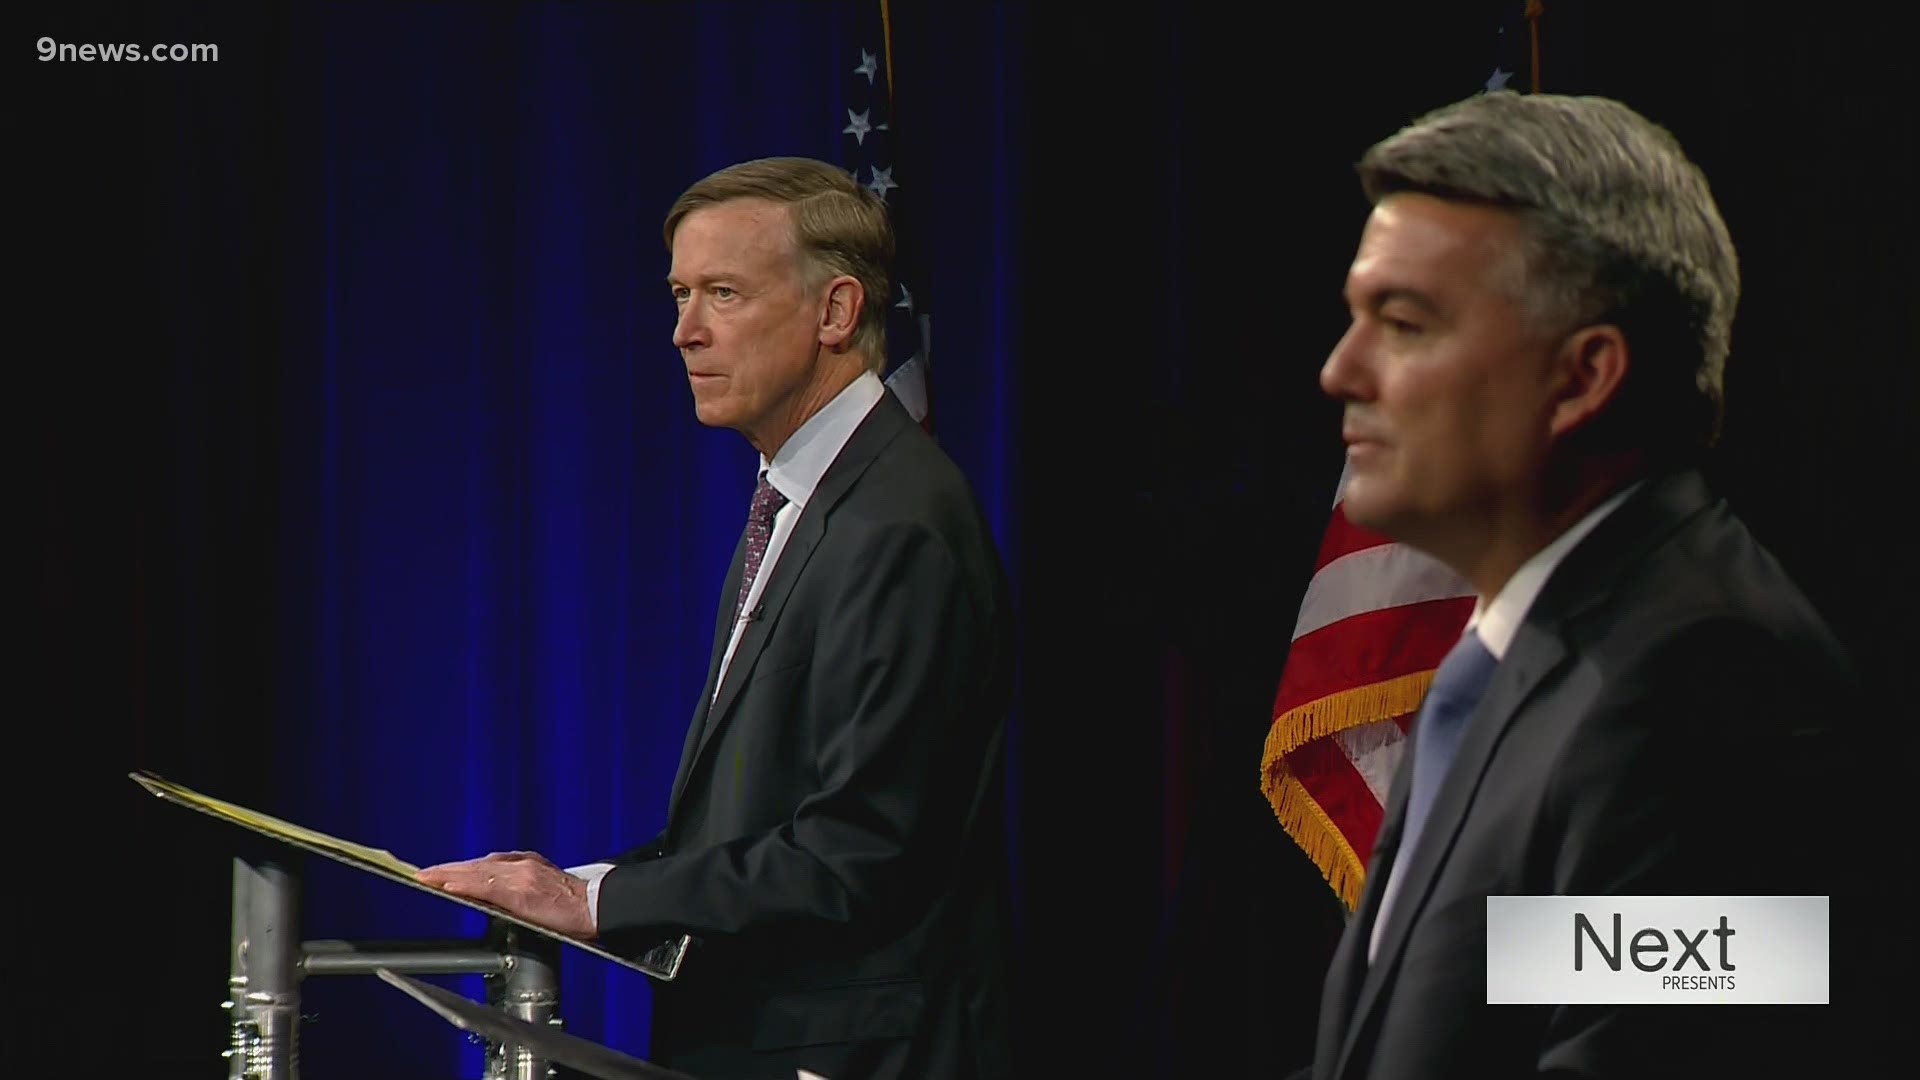 Republican incumbent Cory Gardner and Democratic challenger John Hickenlooper faced off commercial-free, statewide live debate Tuesday.